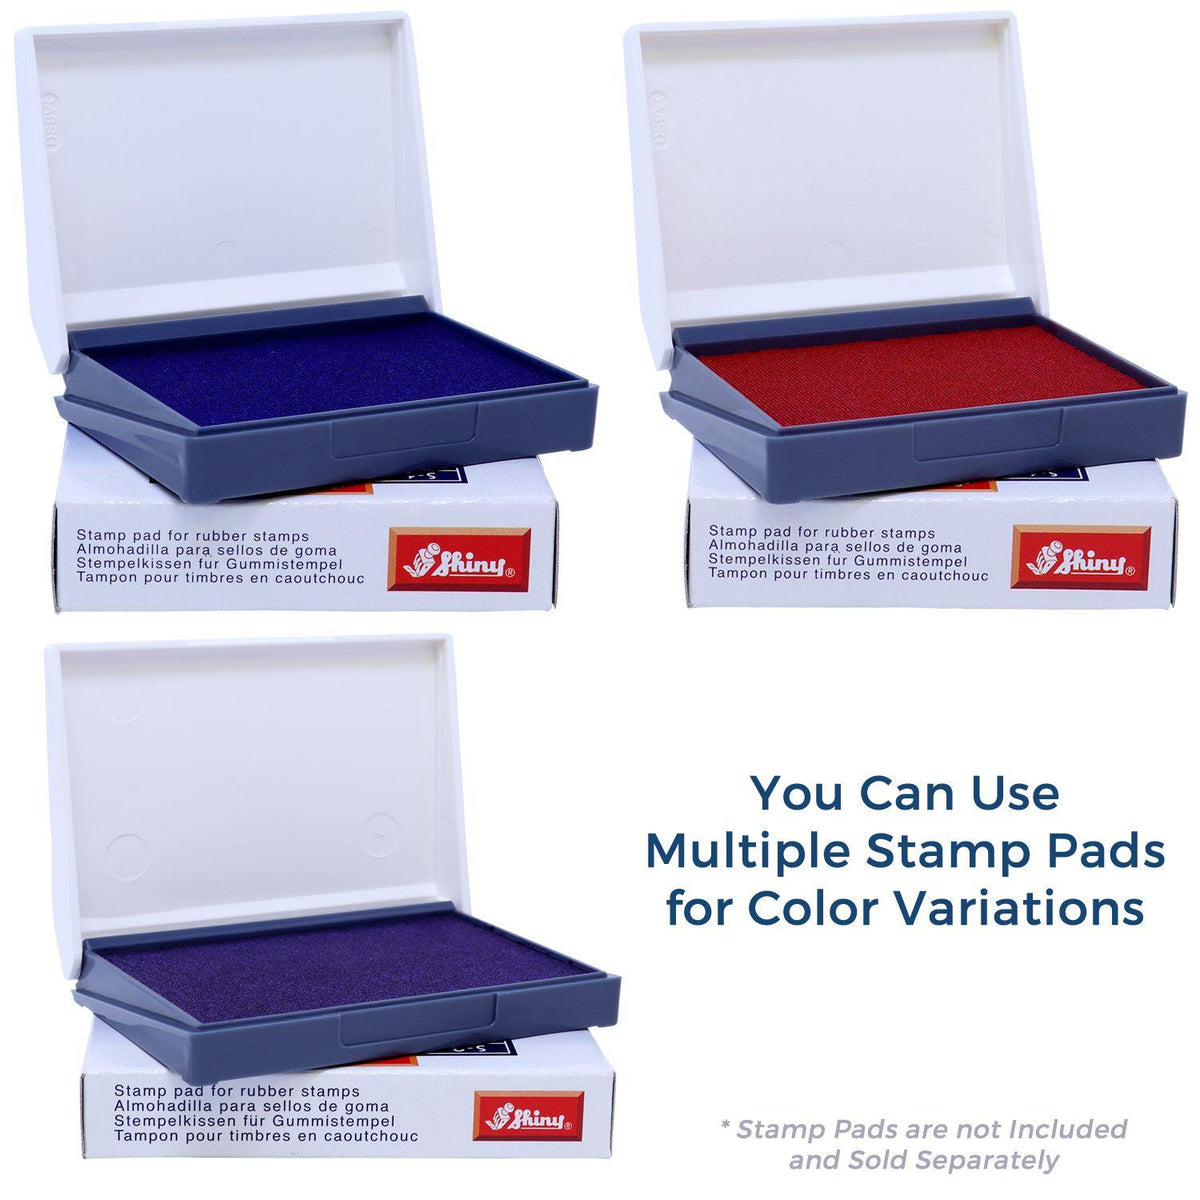 Stamp Pads for Cancelled Rubber Stamp Available